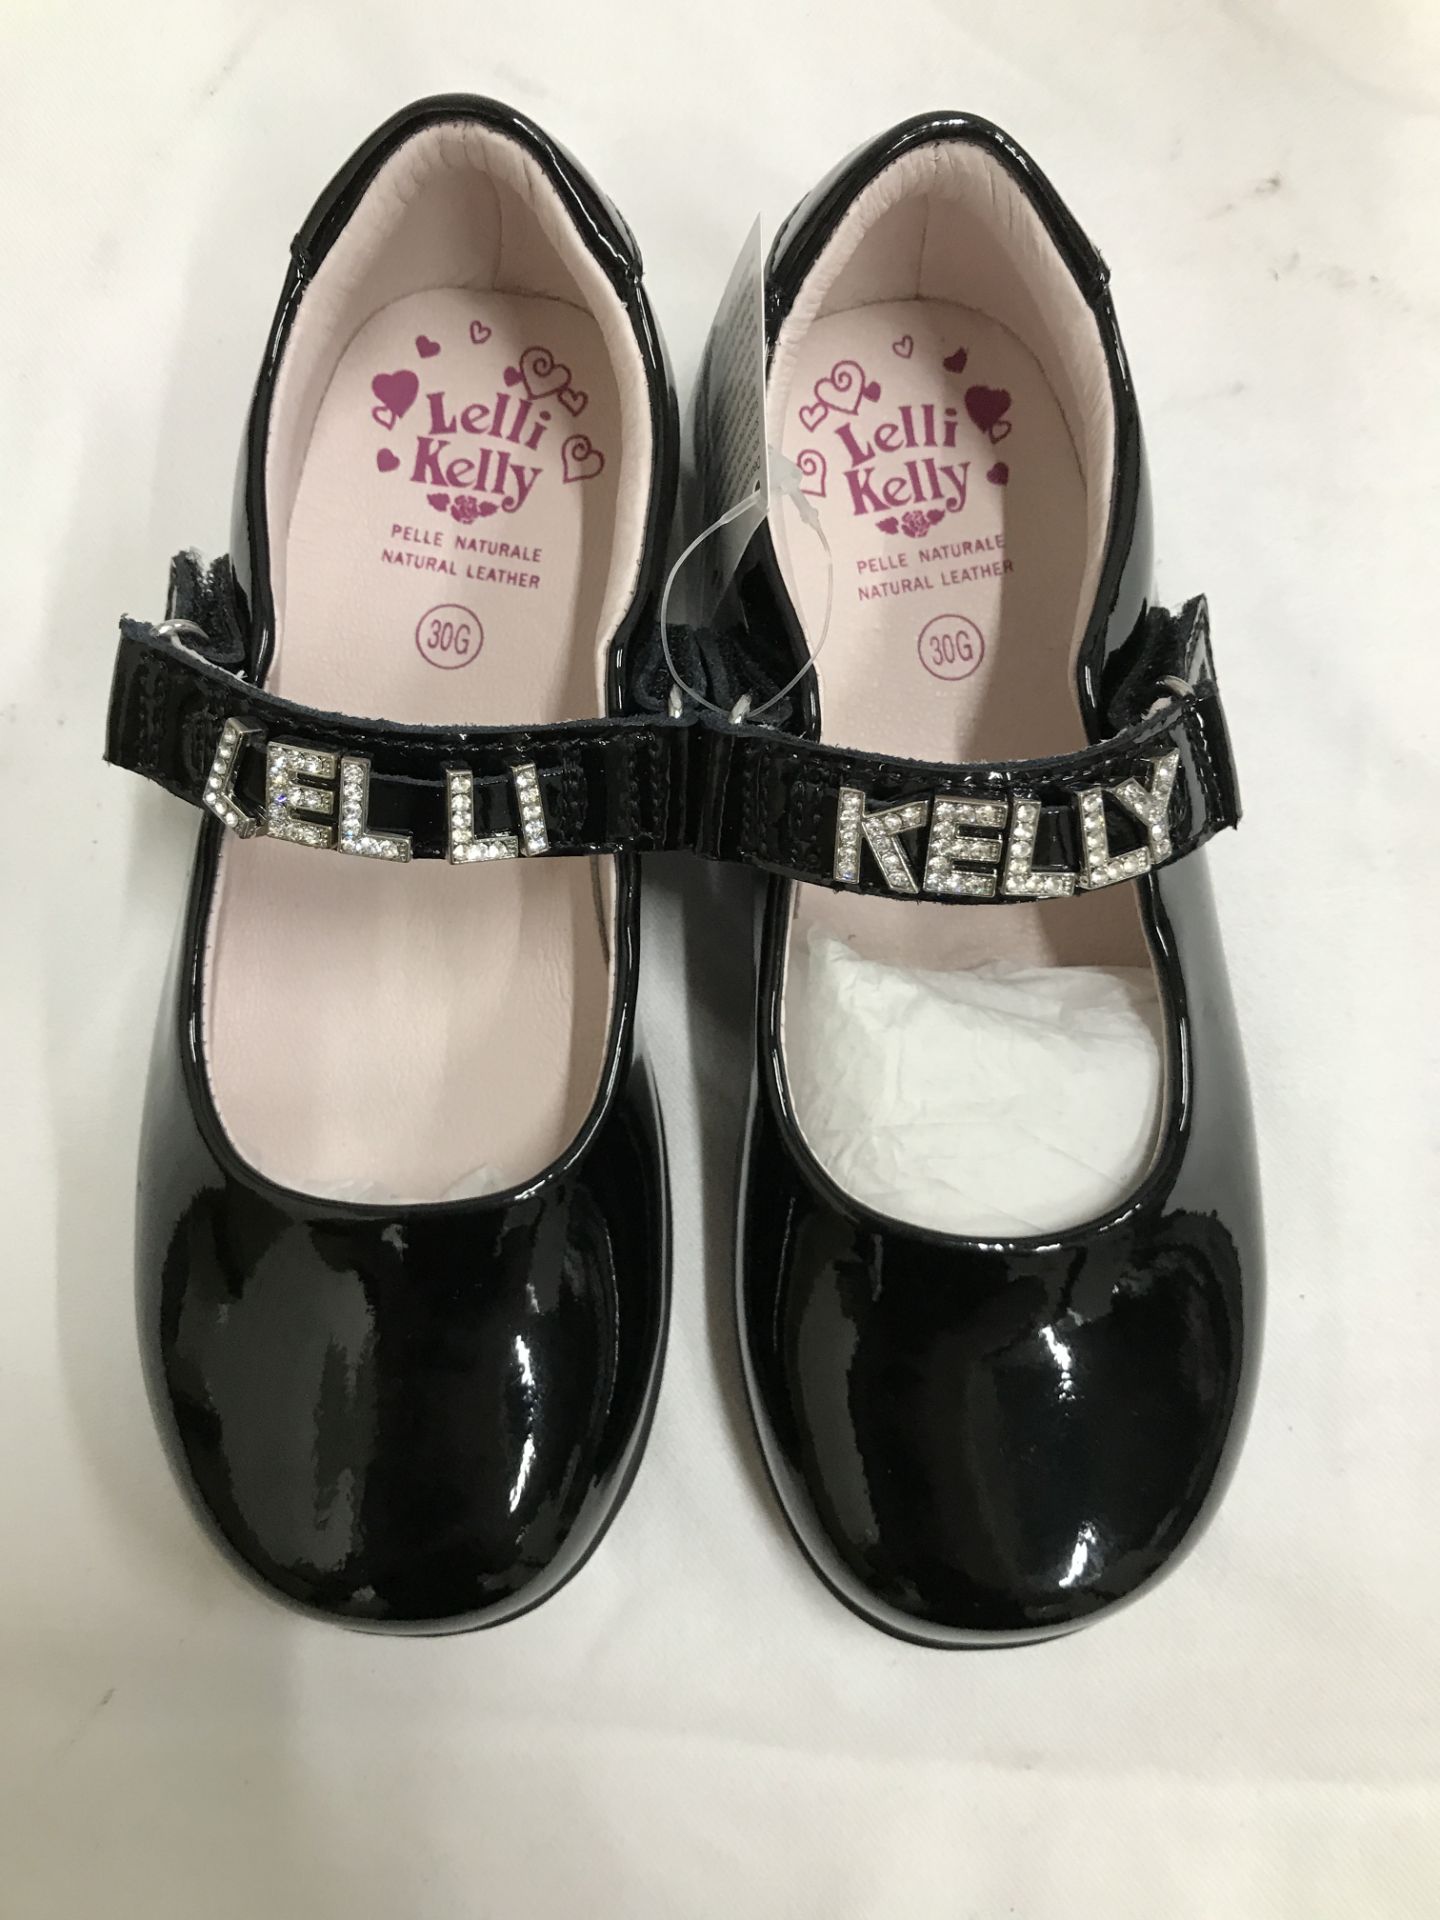 17 x Pairs of Lelli Kelly Children's Shoes - Various Designs - Size UK12 - Image 8 of 9